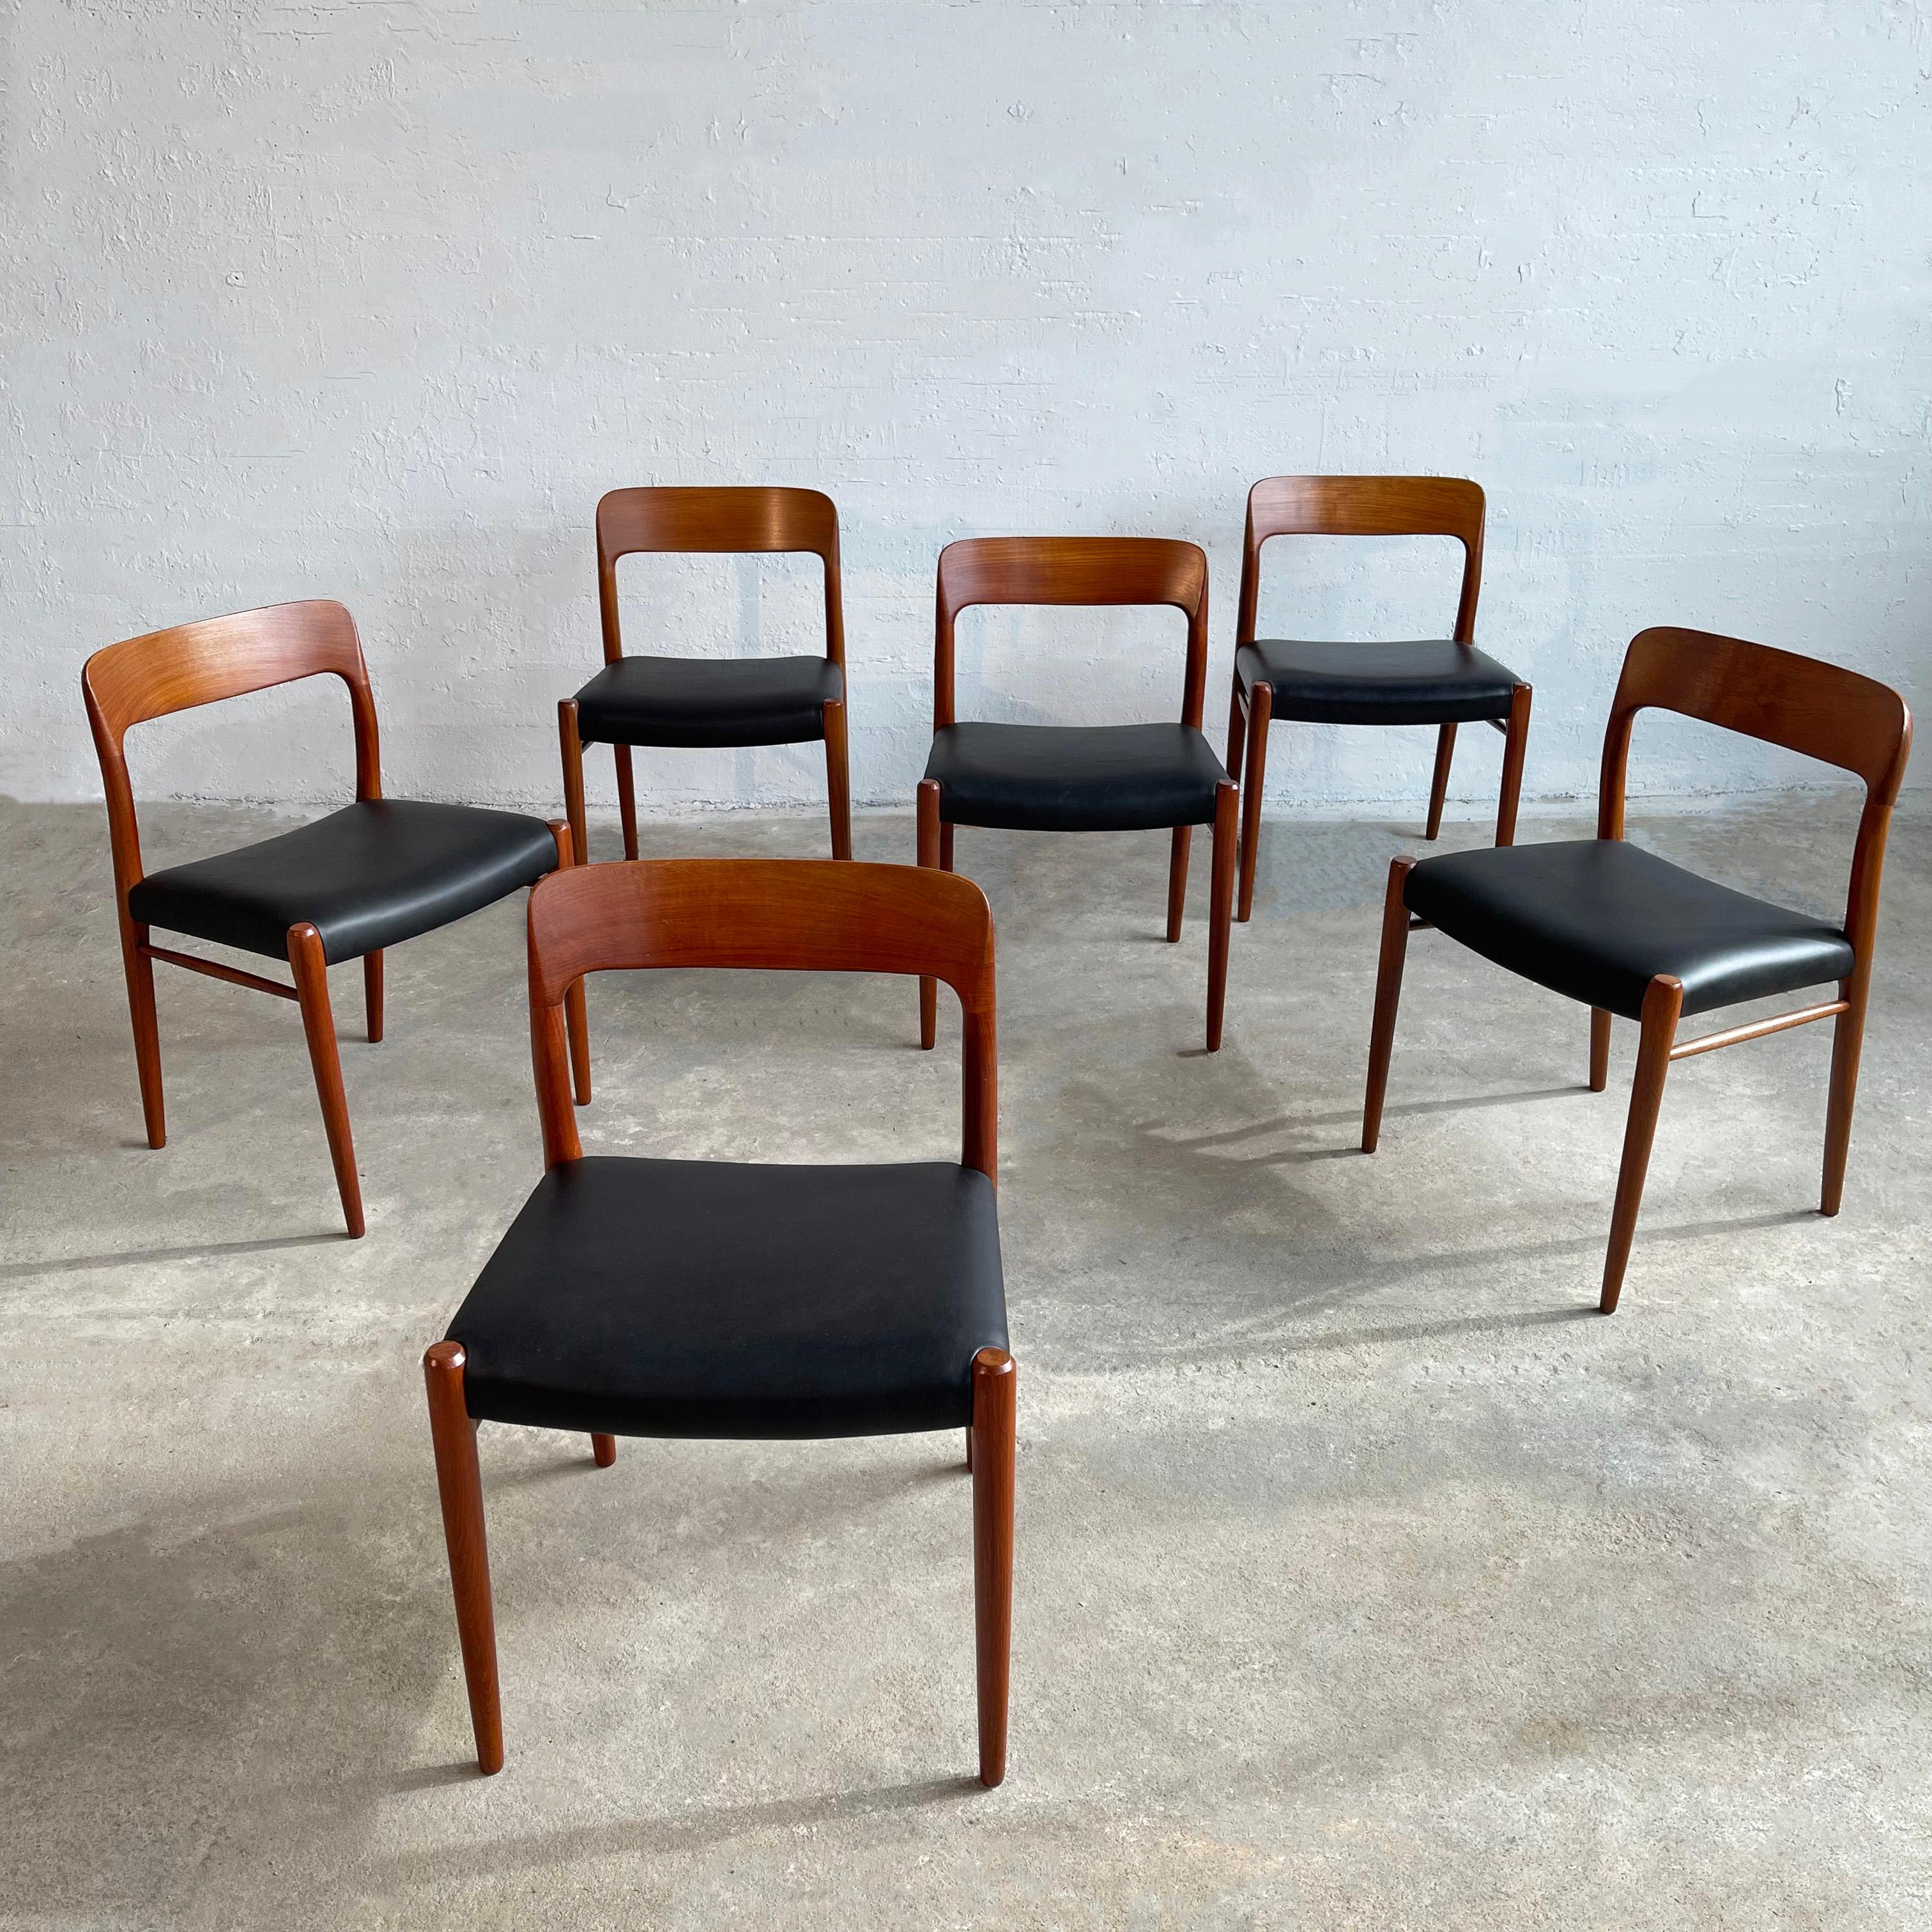 Set of six Scandinavian modern, model 75, teak dining side chairs by Niels O Møller for J.L. Møllers Møbelfabrik feature newly finished honey-toned teak frames with newly upholstered black leather seats with new webbing. Comfortable and iconic